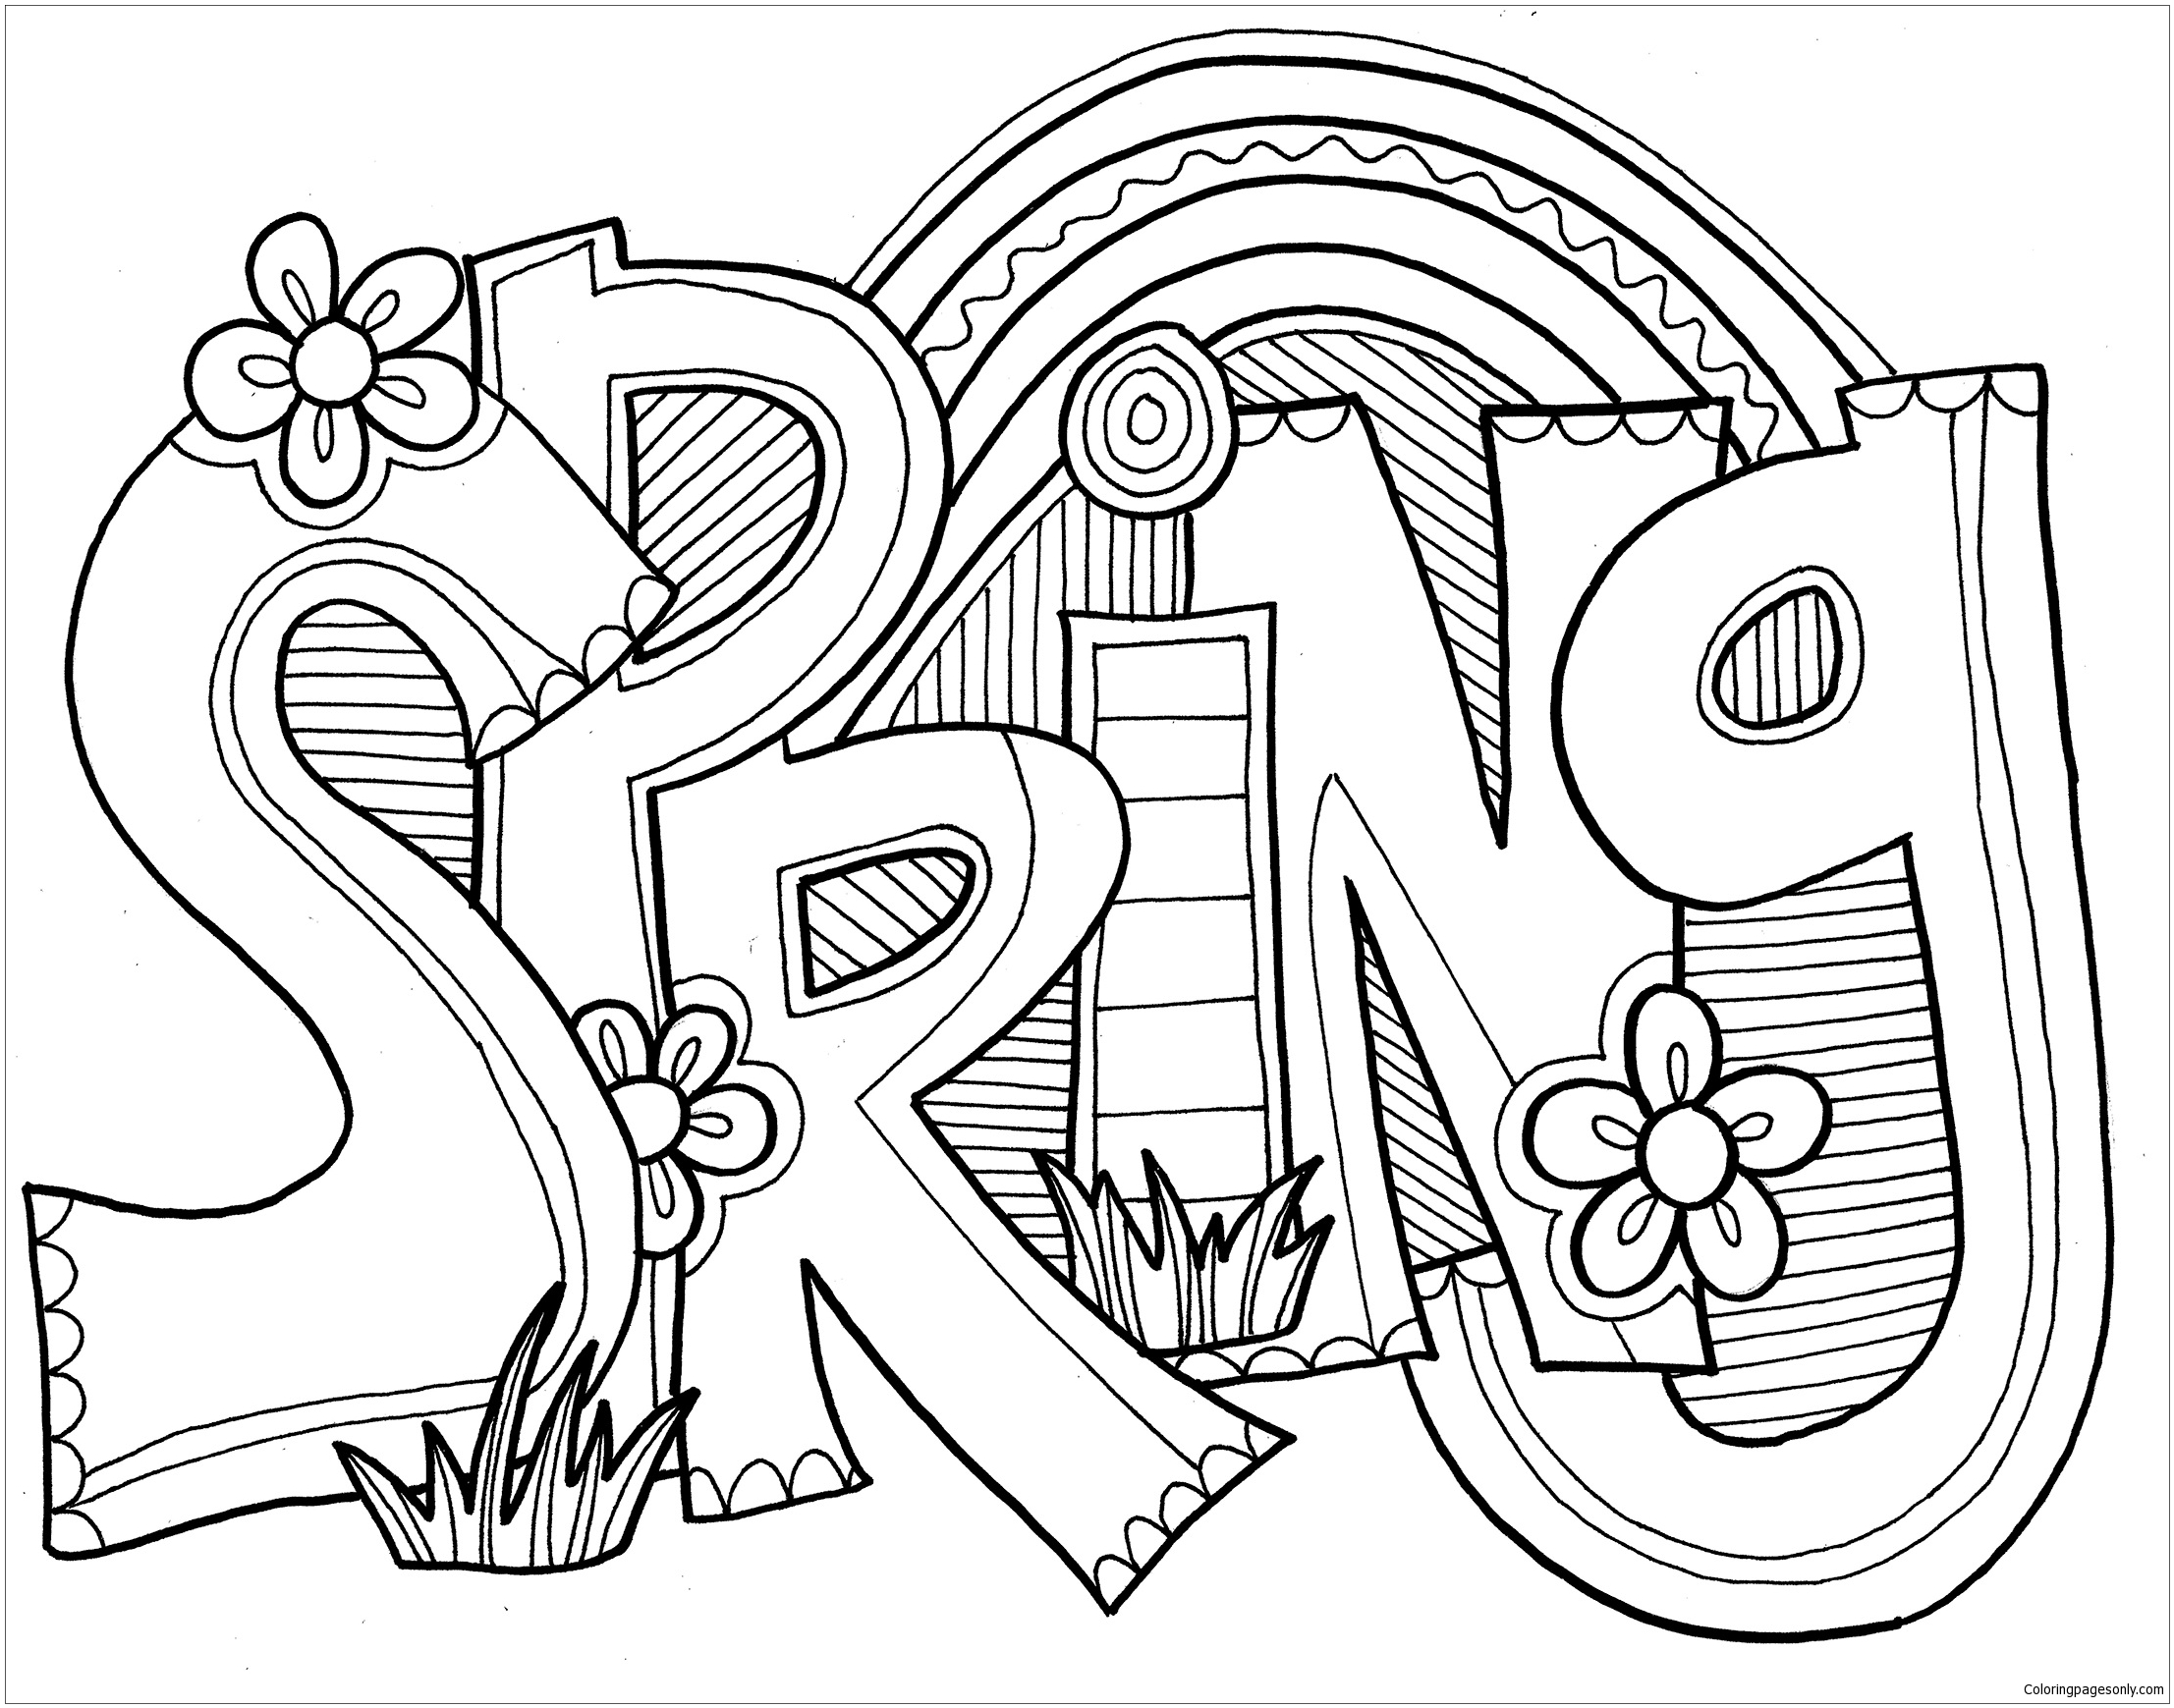 Spring Word Coloring Pages - Nature & Seasons Coloring ...